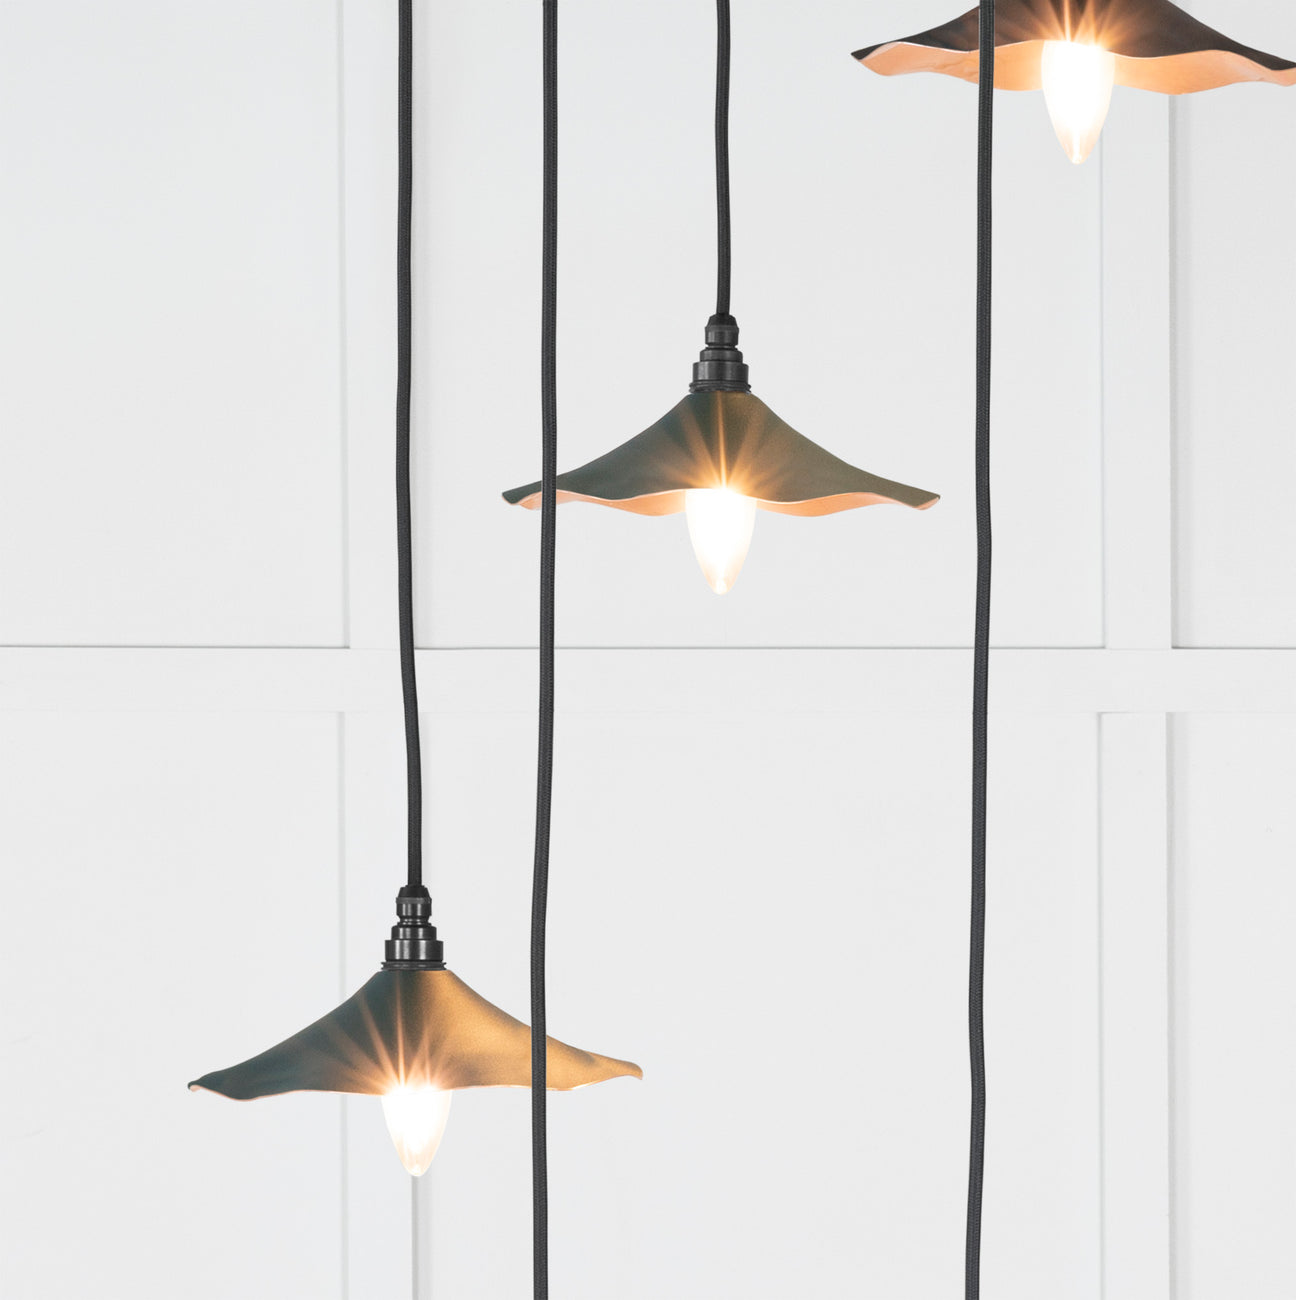 Image showing a range of Pendant Cluster Lights made by From the Anvil